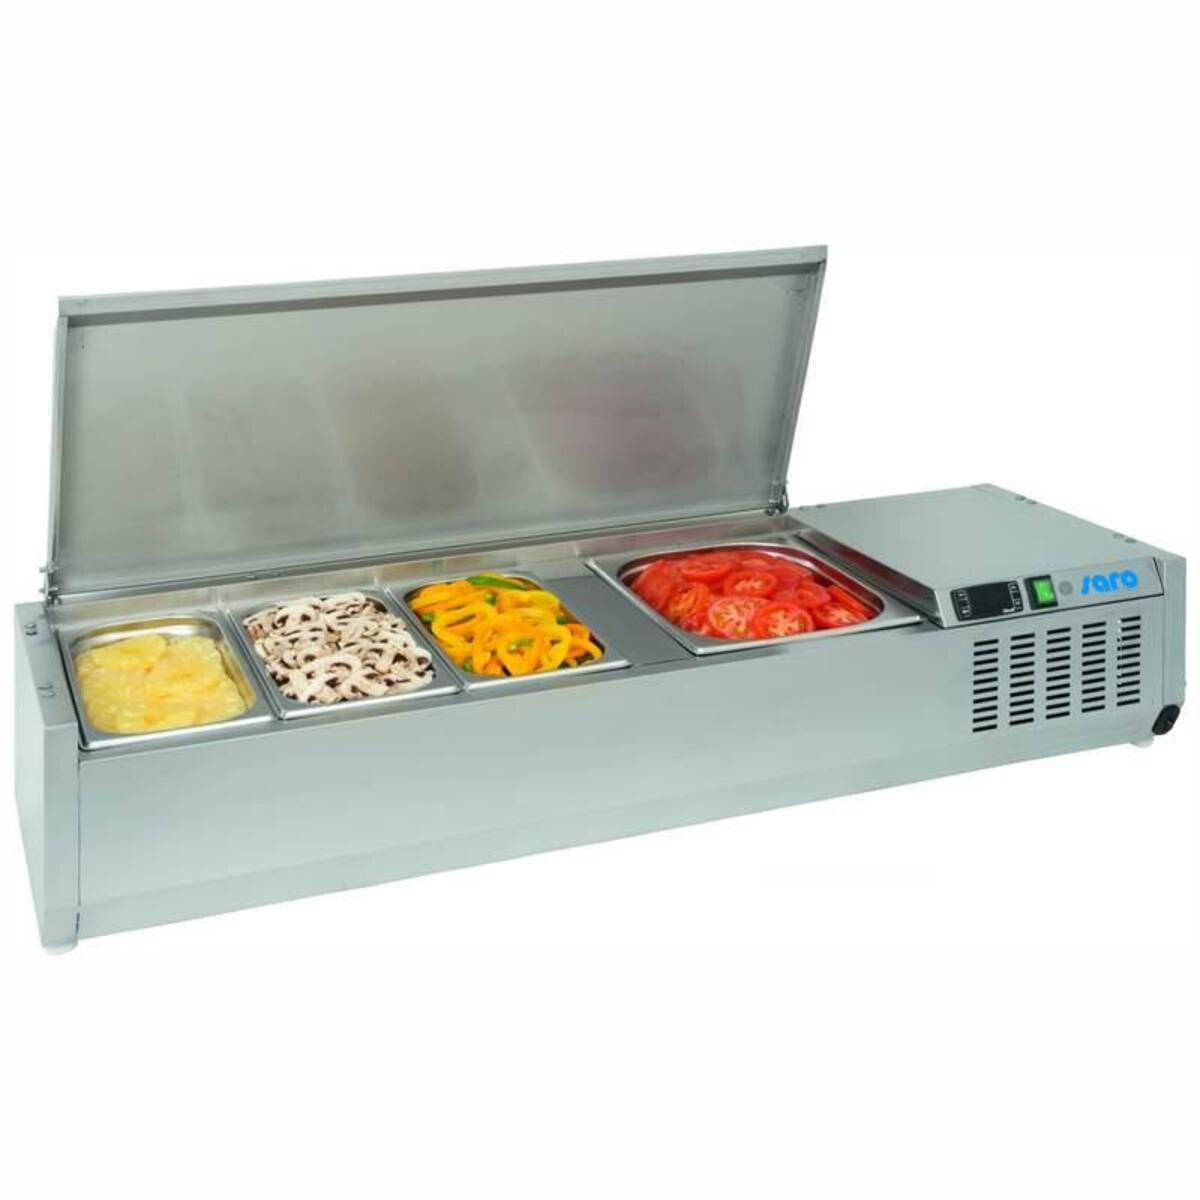 Saladette 7 bacs GN 1/3 couvercle inox